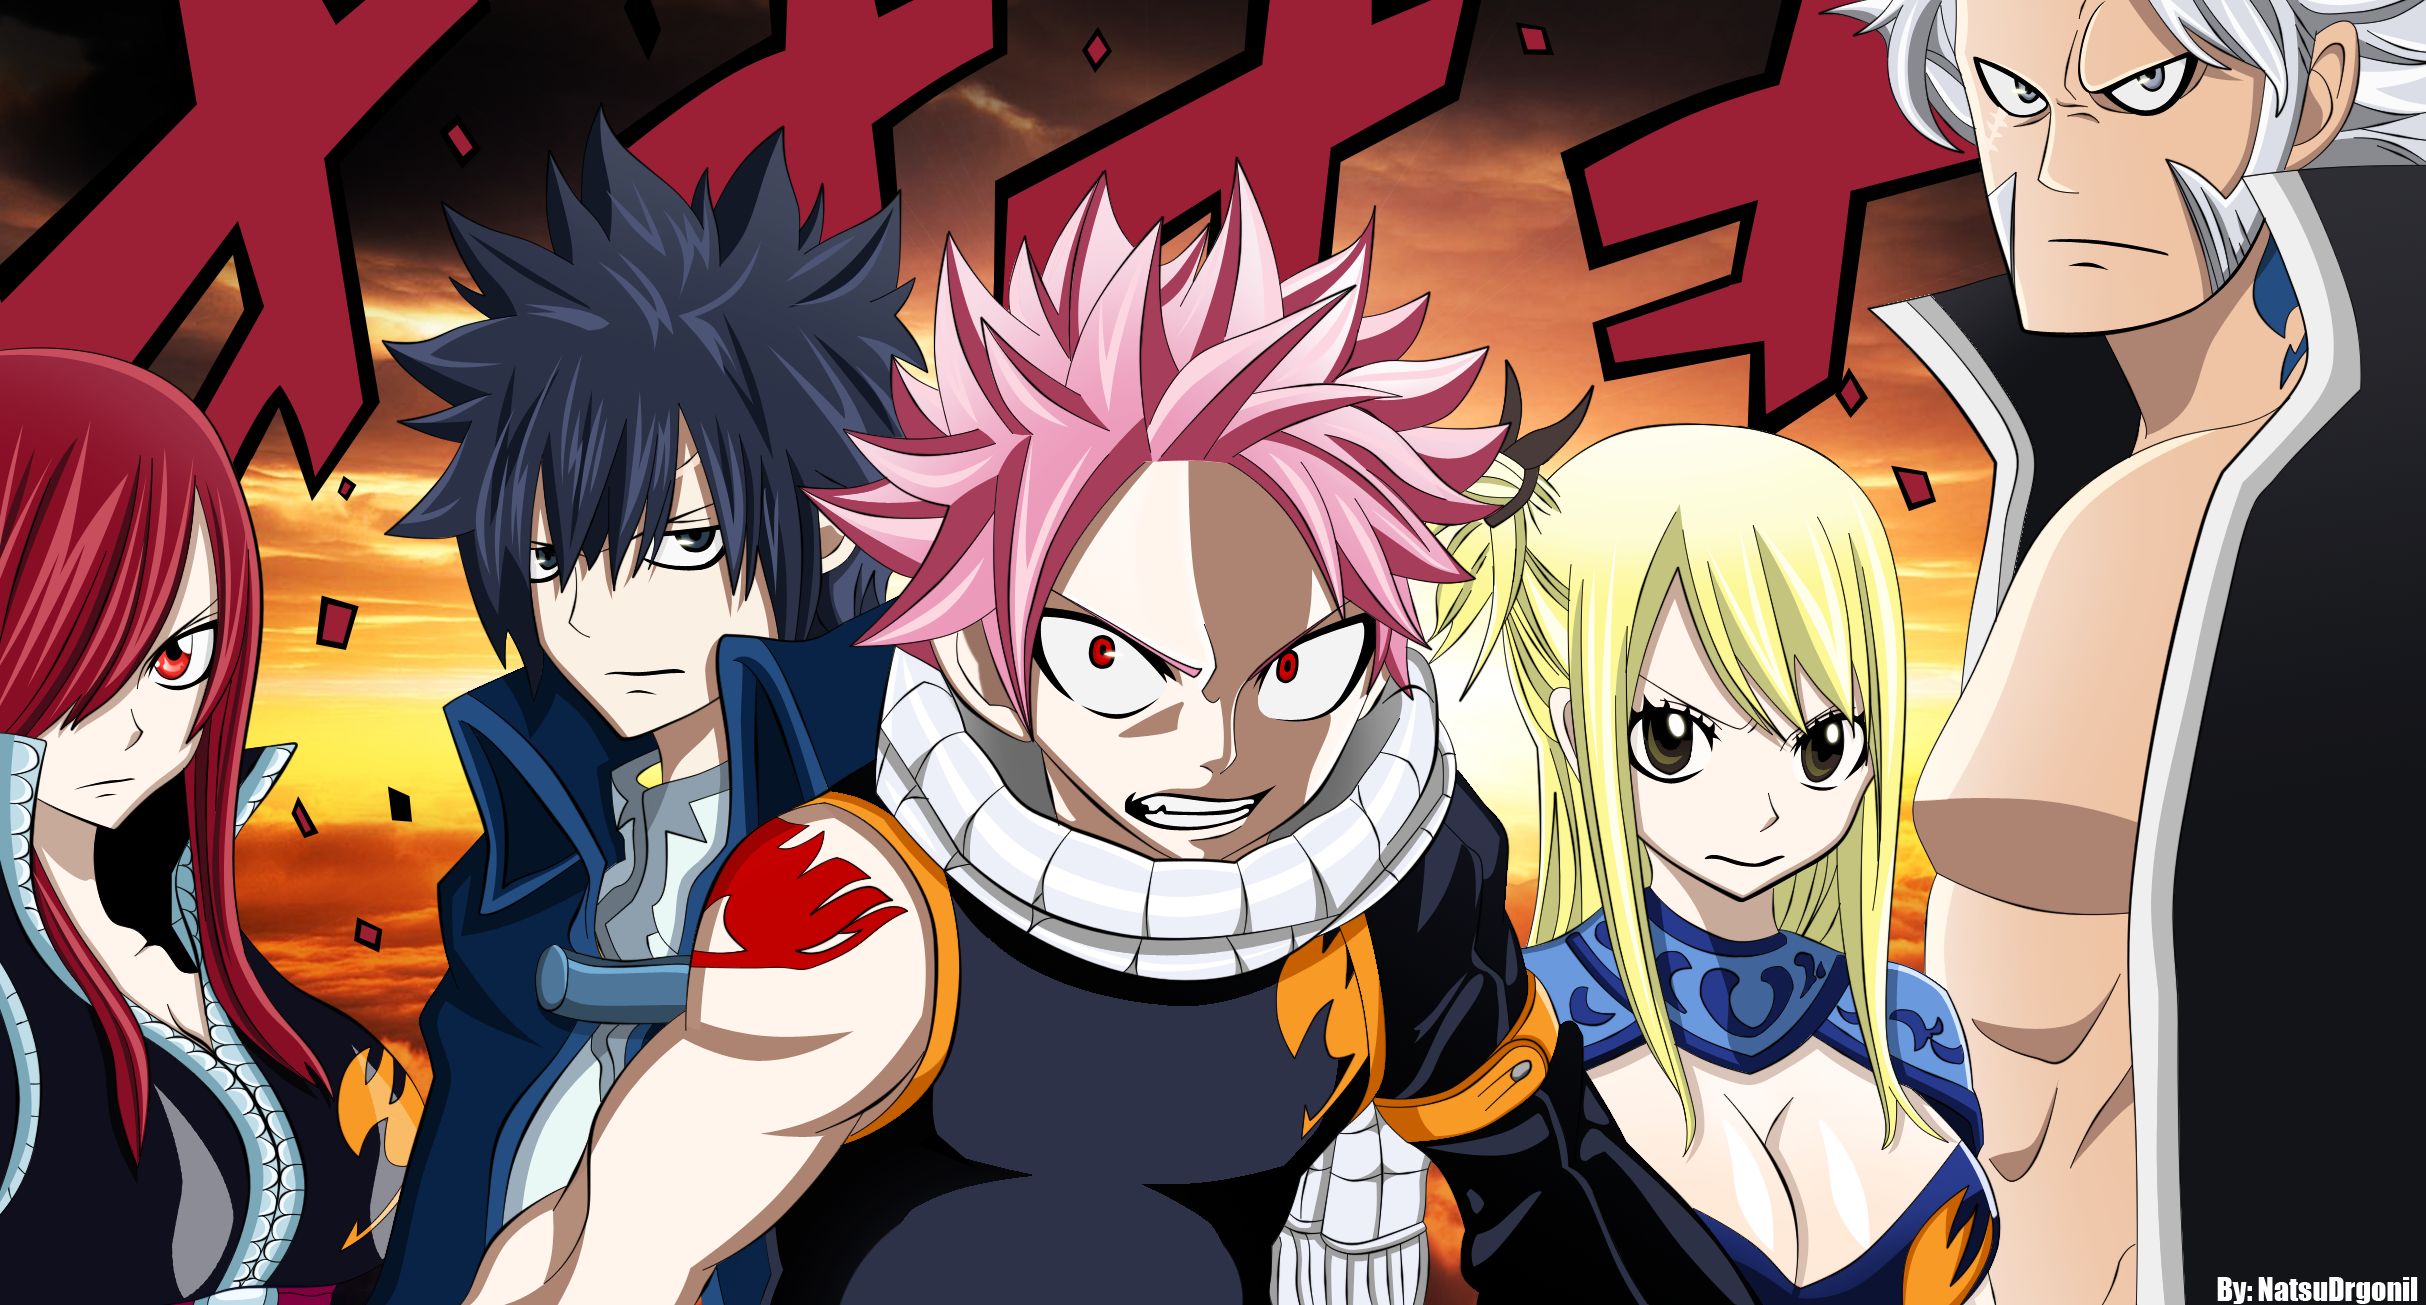 Lucy Heartfilia Anime Fairy Tail Natsu Dragneel Anime human fictional  Character cartoon png  PNGWing